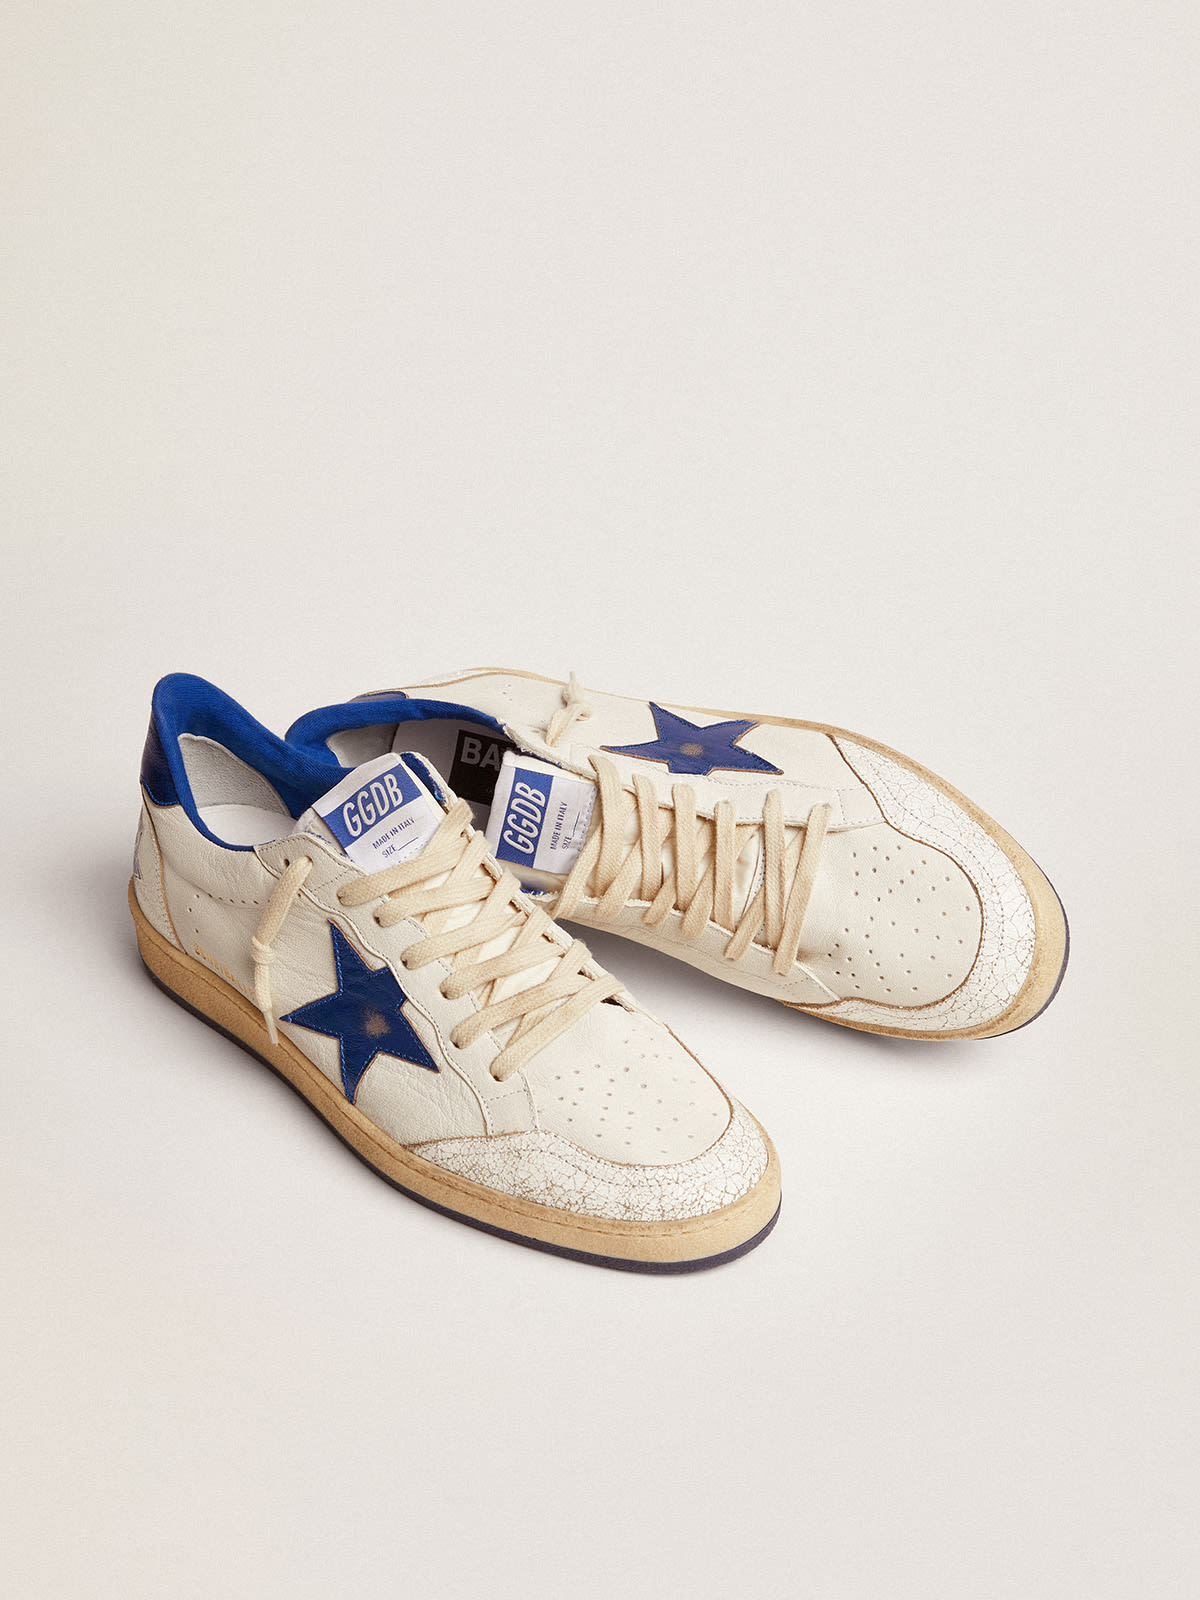 Golden Goose - Ball Star sneakers in white nappa leather with light blue laminated leather star and heel tab in 